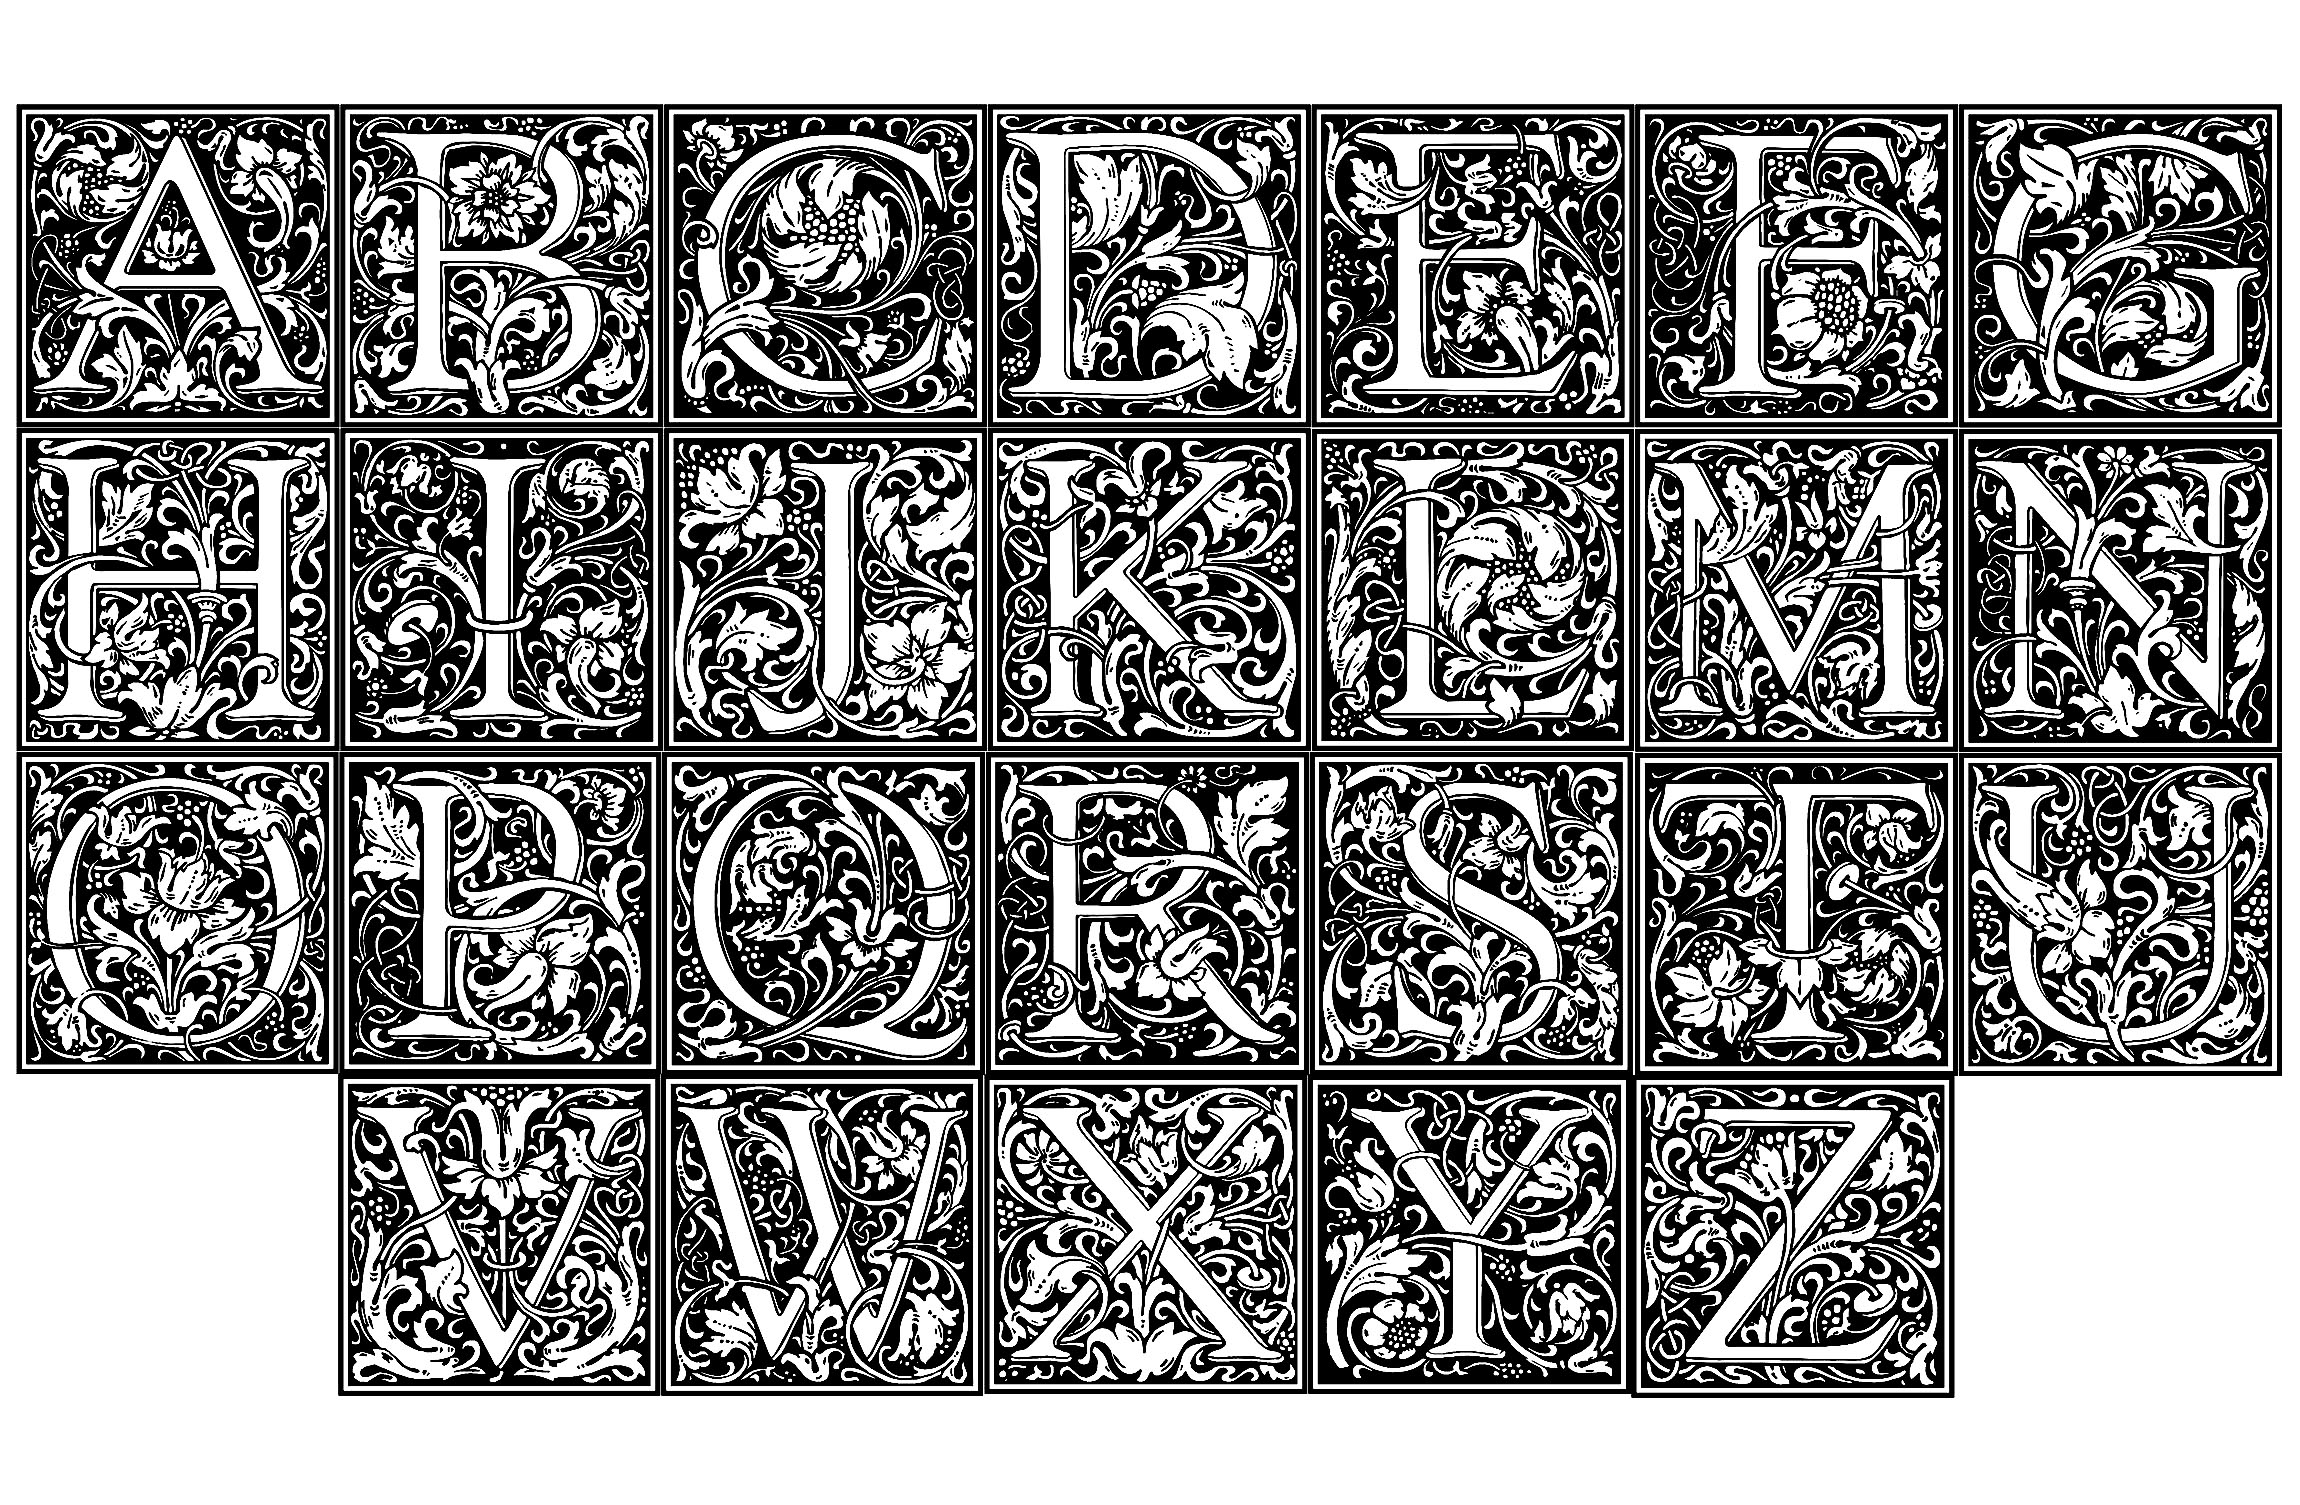 Alphabet letters created by William Morris, in the pure style of the Arts and Craft movement